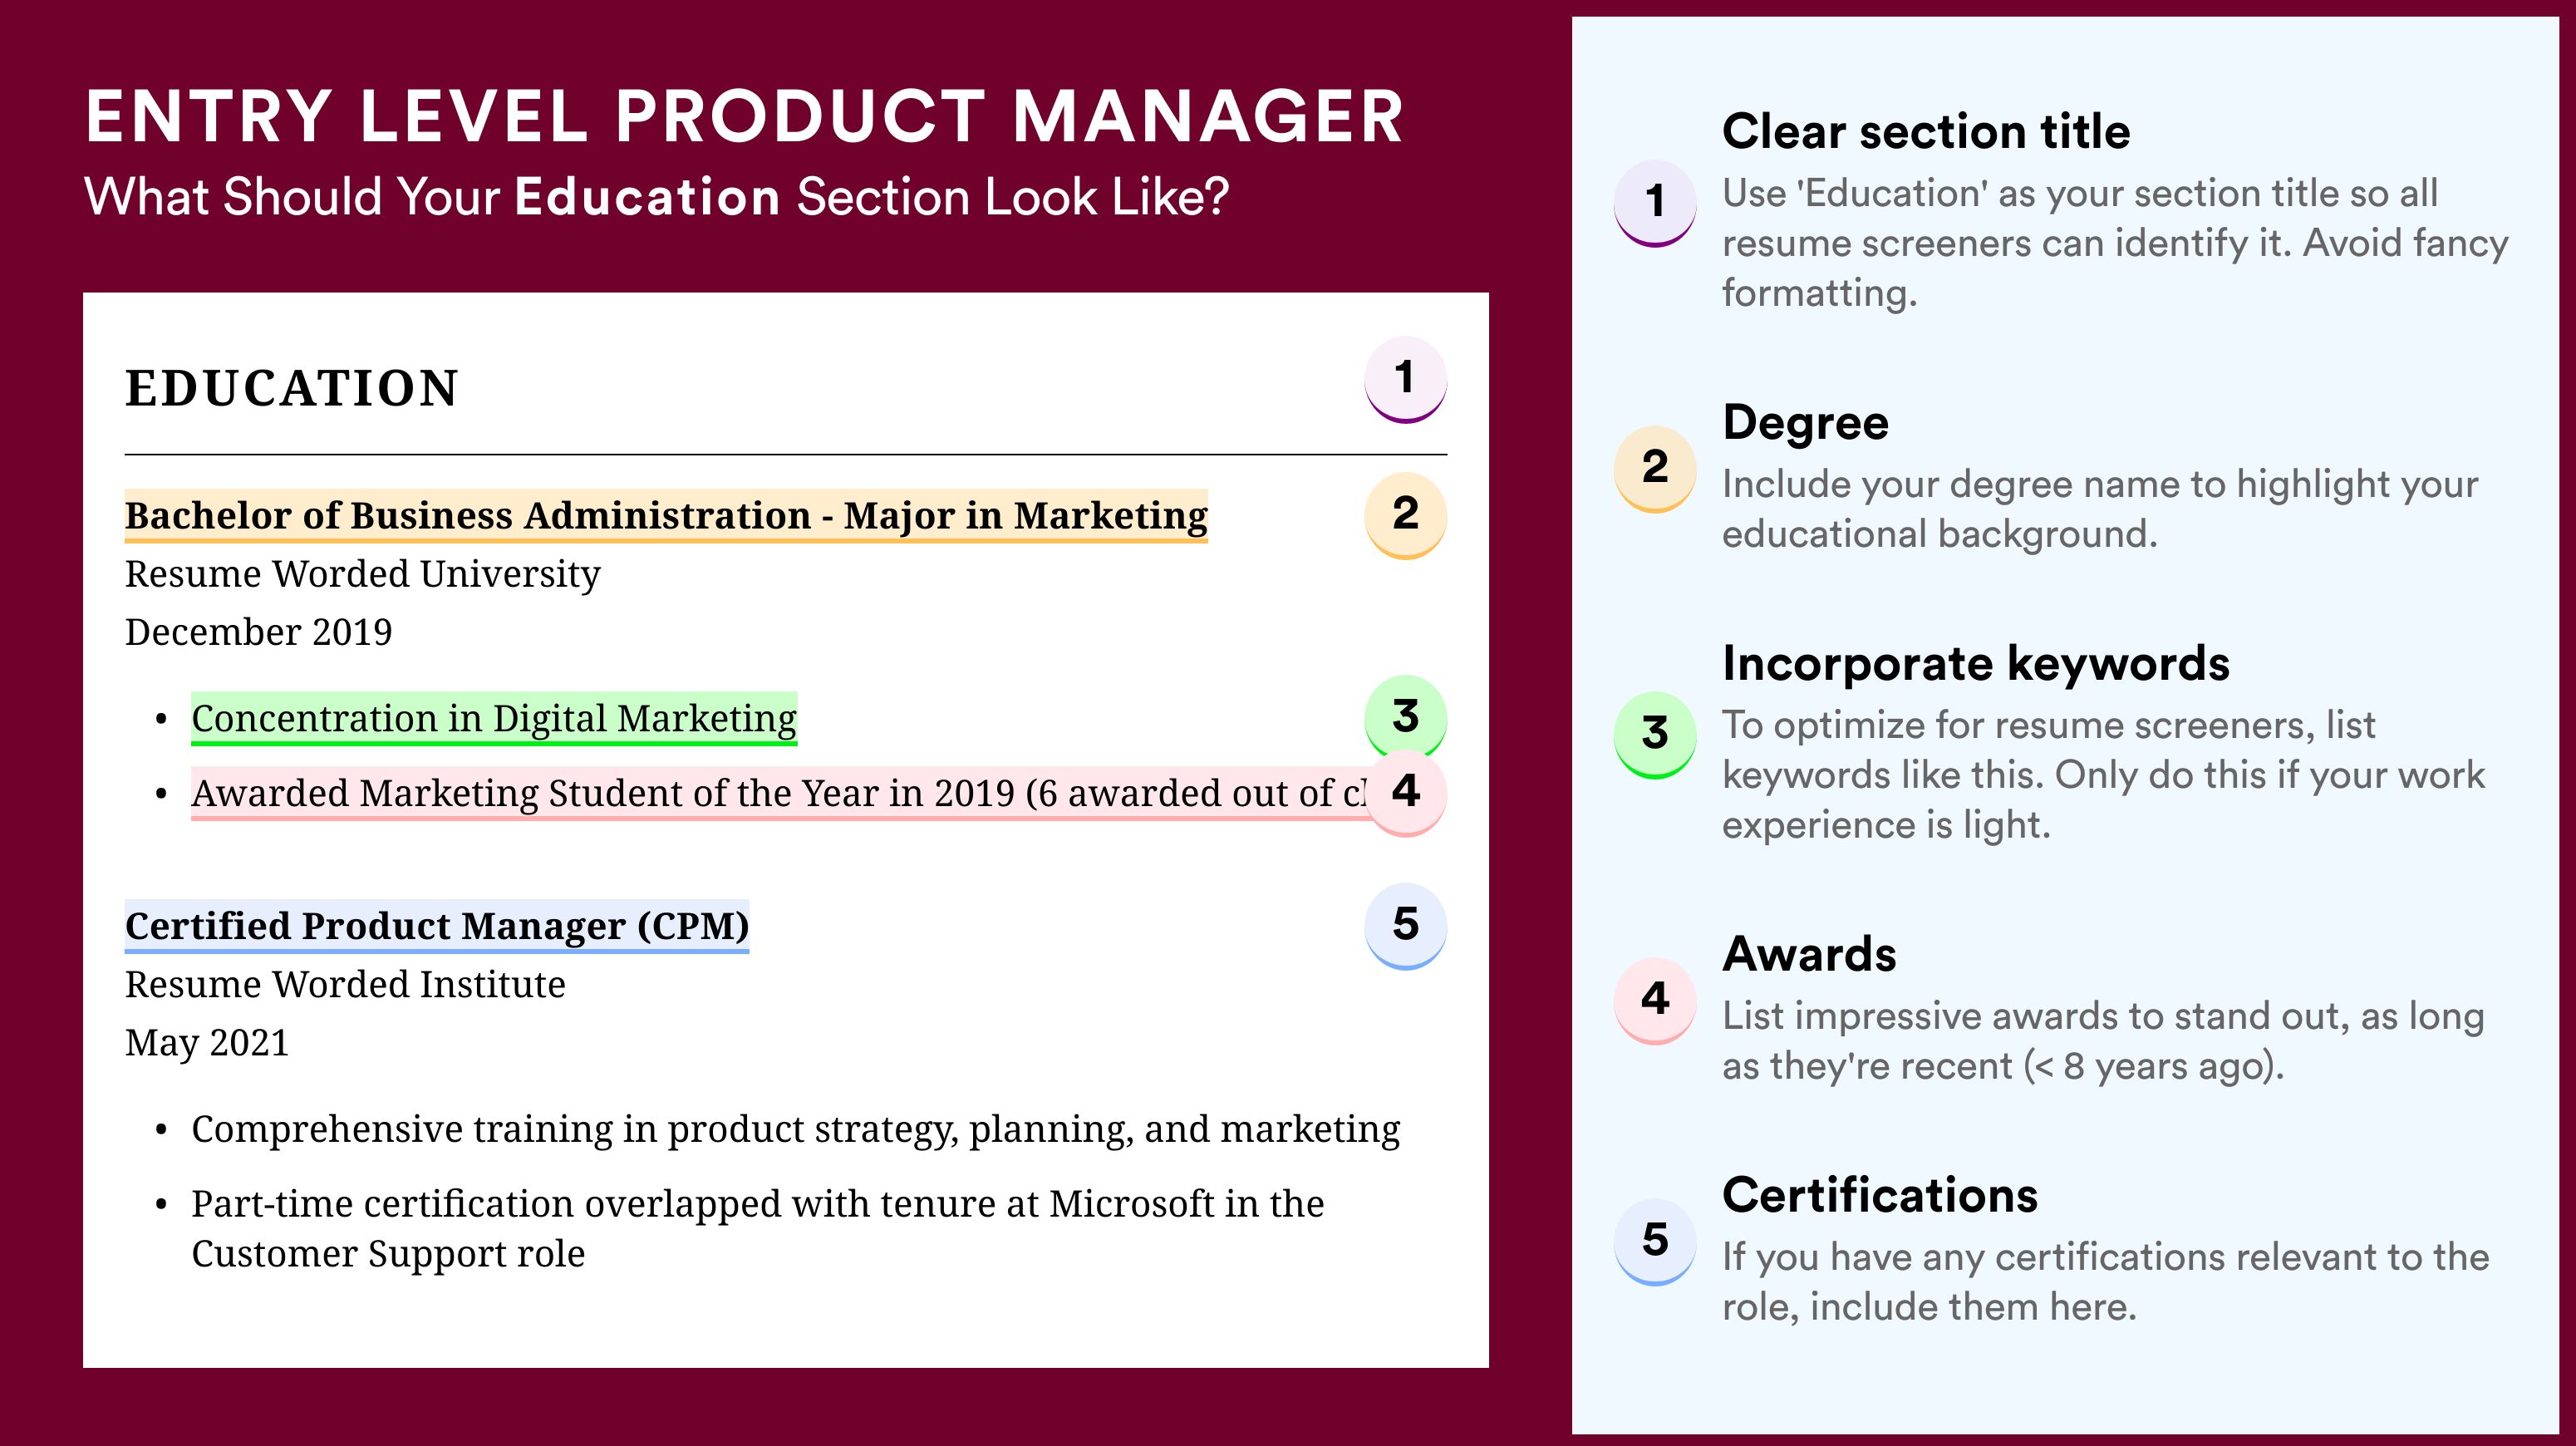 How To Write An Education Section - Entry Level Product Manager Roles